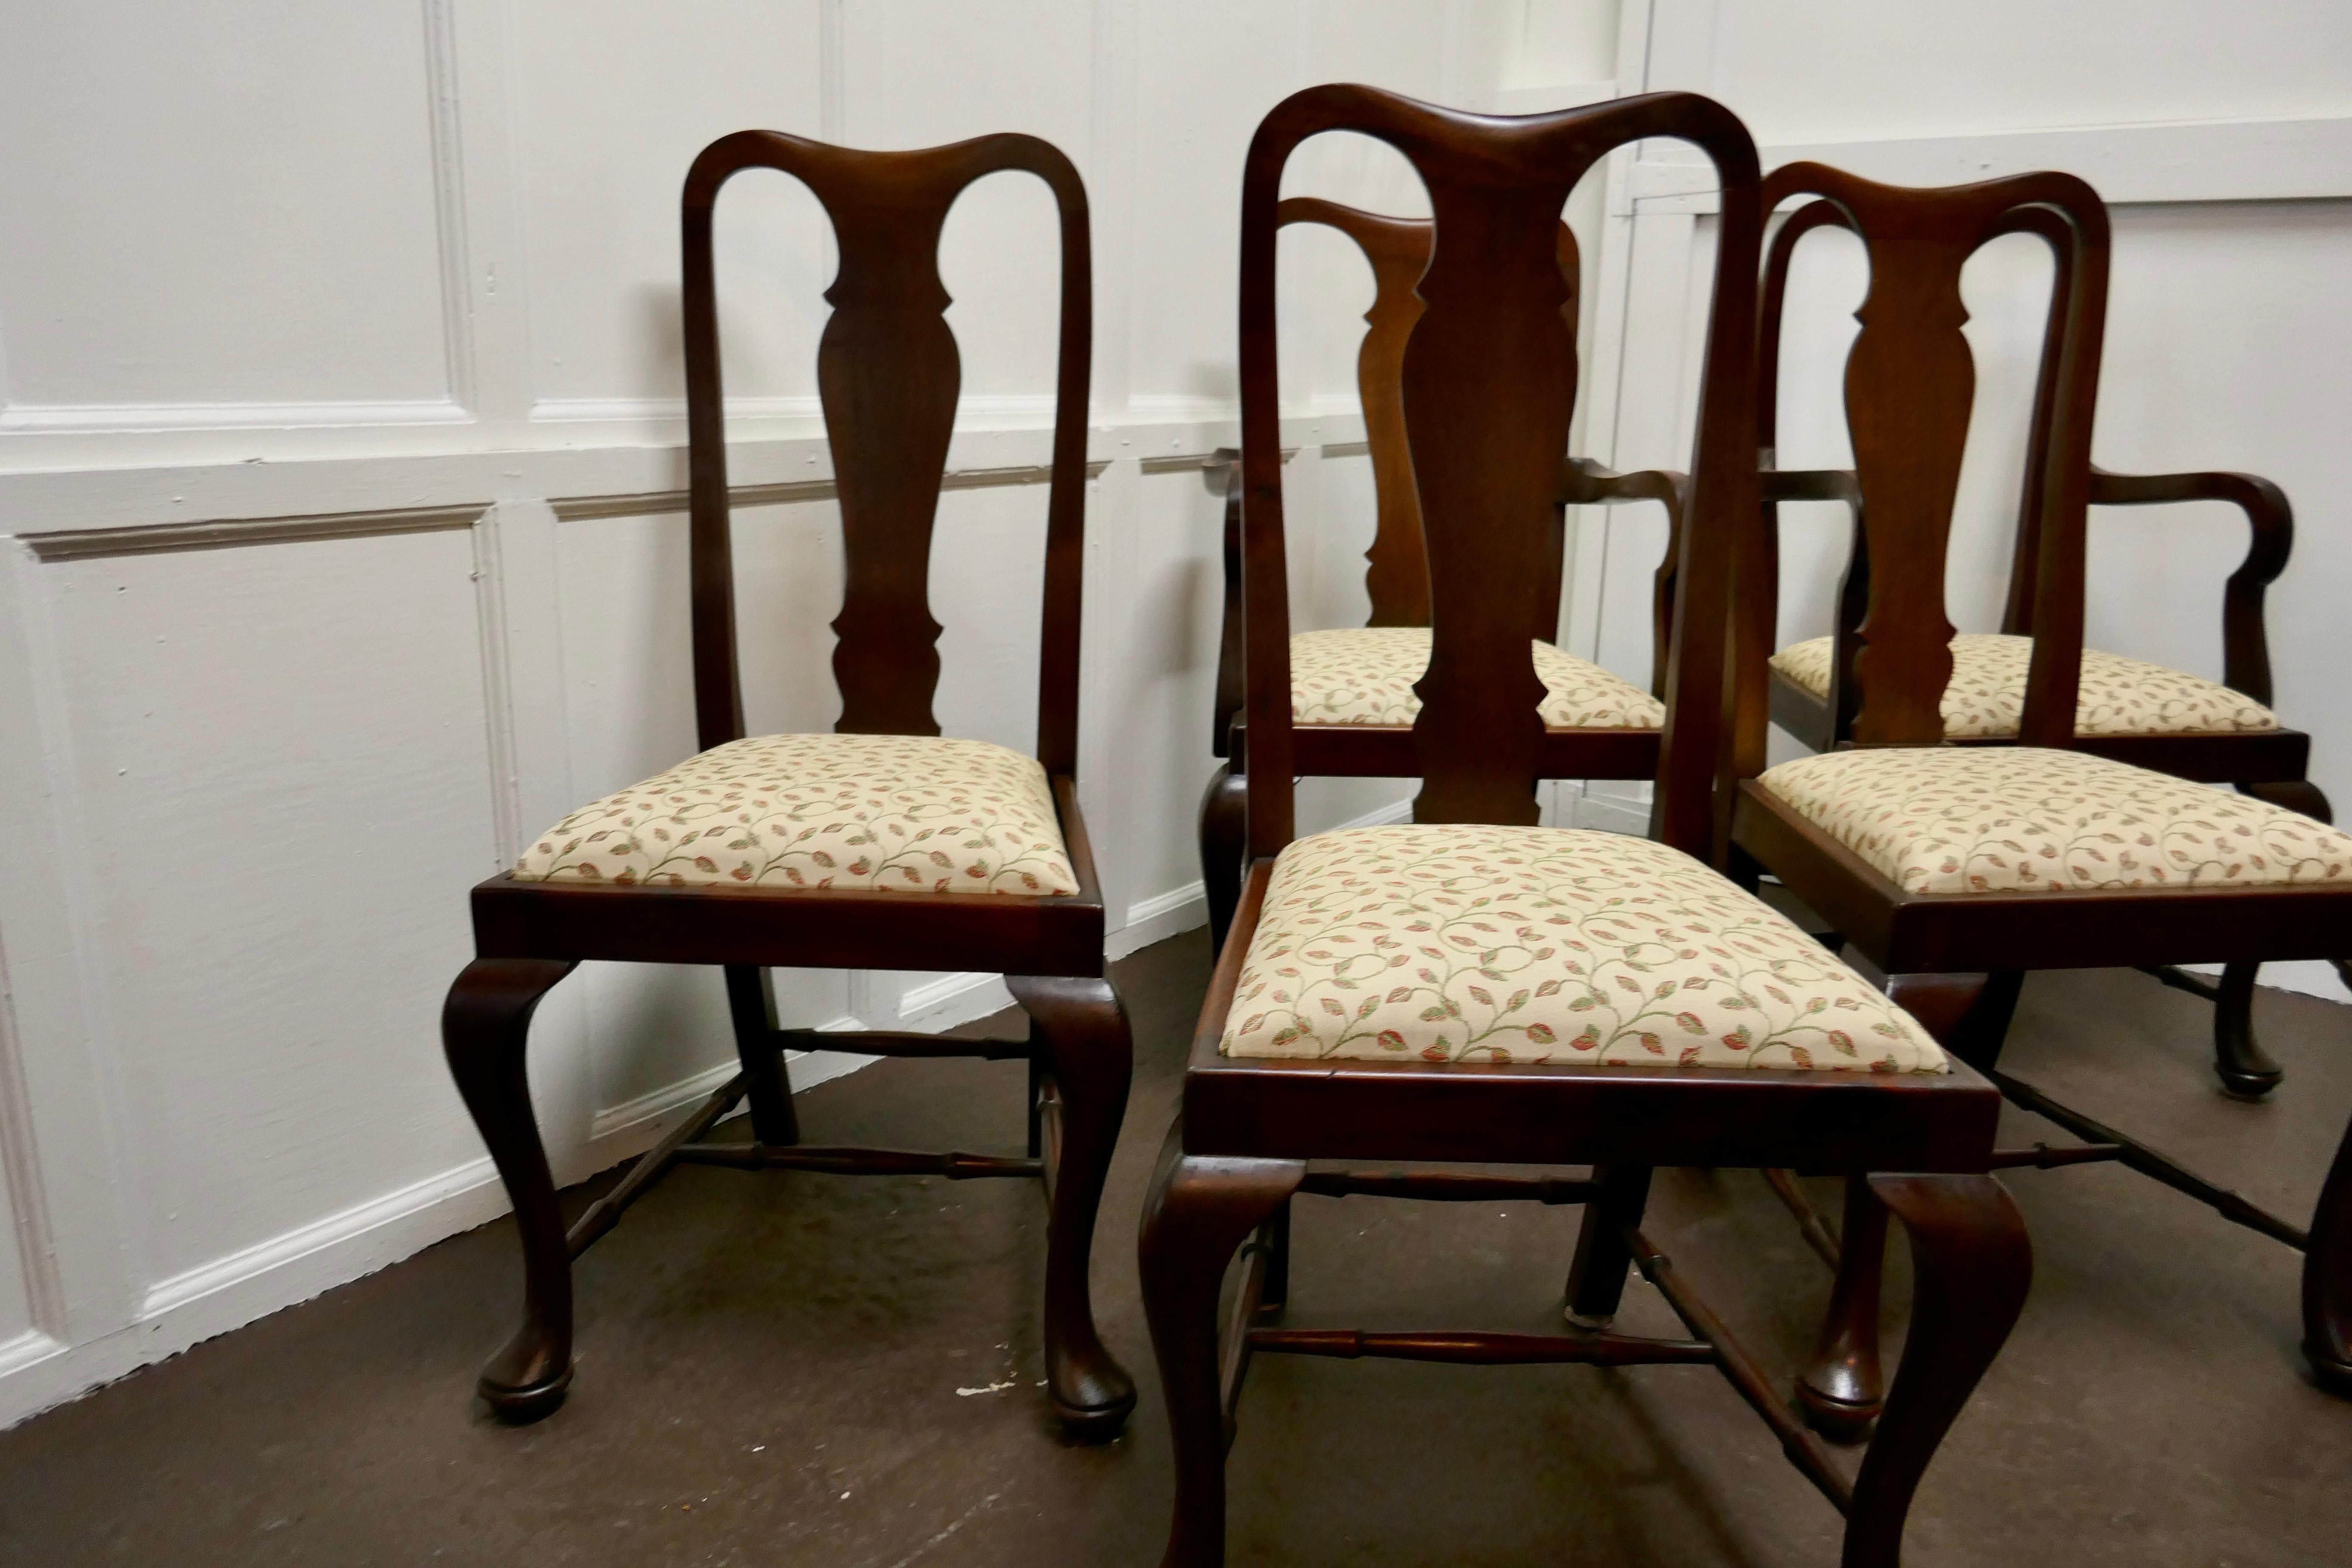 A set of 6 Queen Anne style mahogany dining chairs

A lovely looking set.
The chairs are a Classic design and made in mahogany they have a solid back splat, with cabriole legs and shepherd’s crook arm rests, they are roomy and comfortable, the